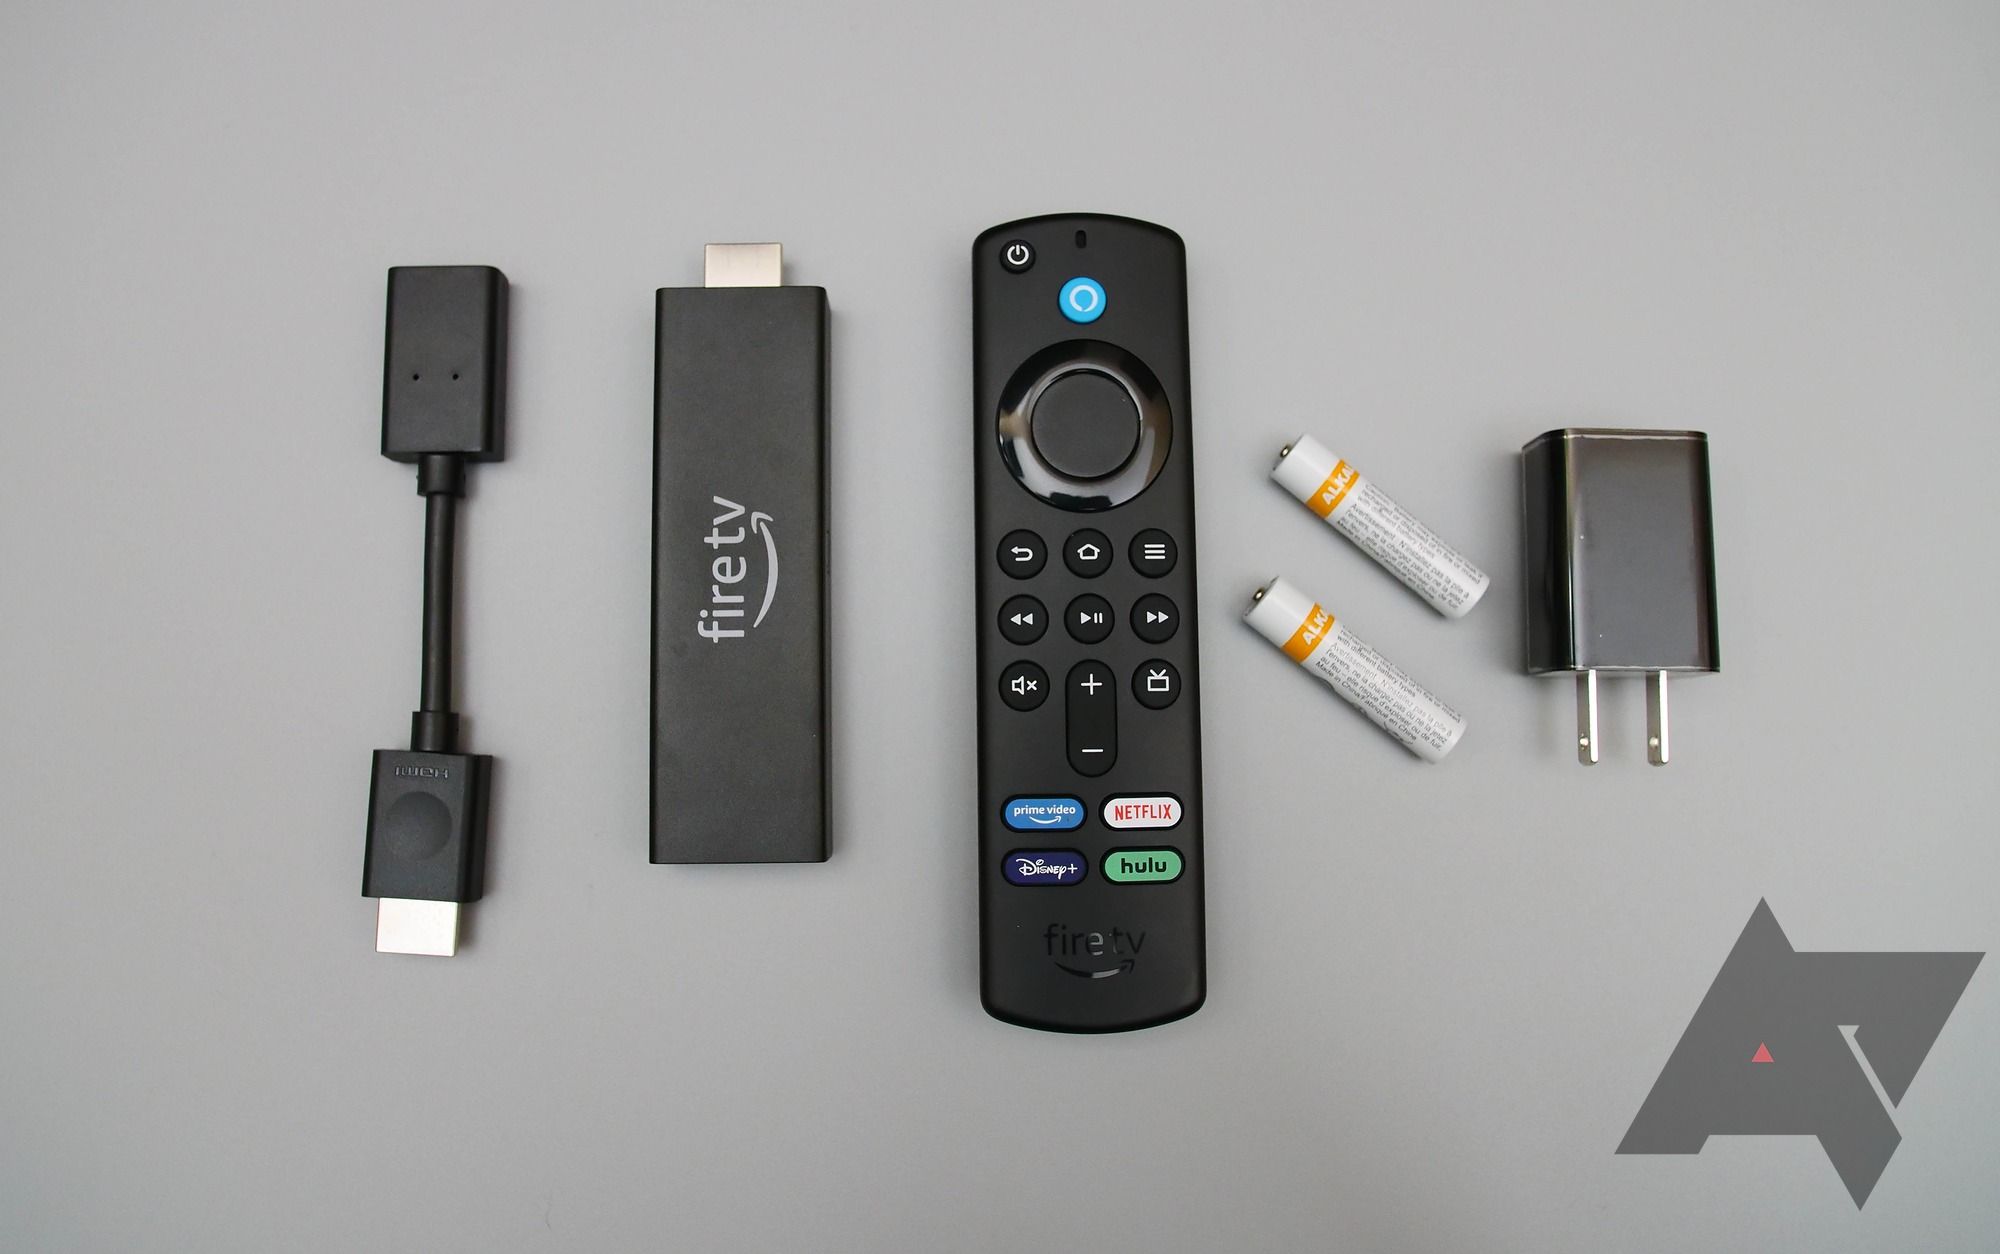 s new Fire TV Stick 4K and 4K Max already have Black Friday